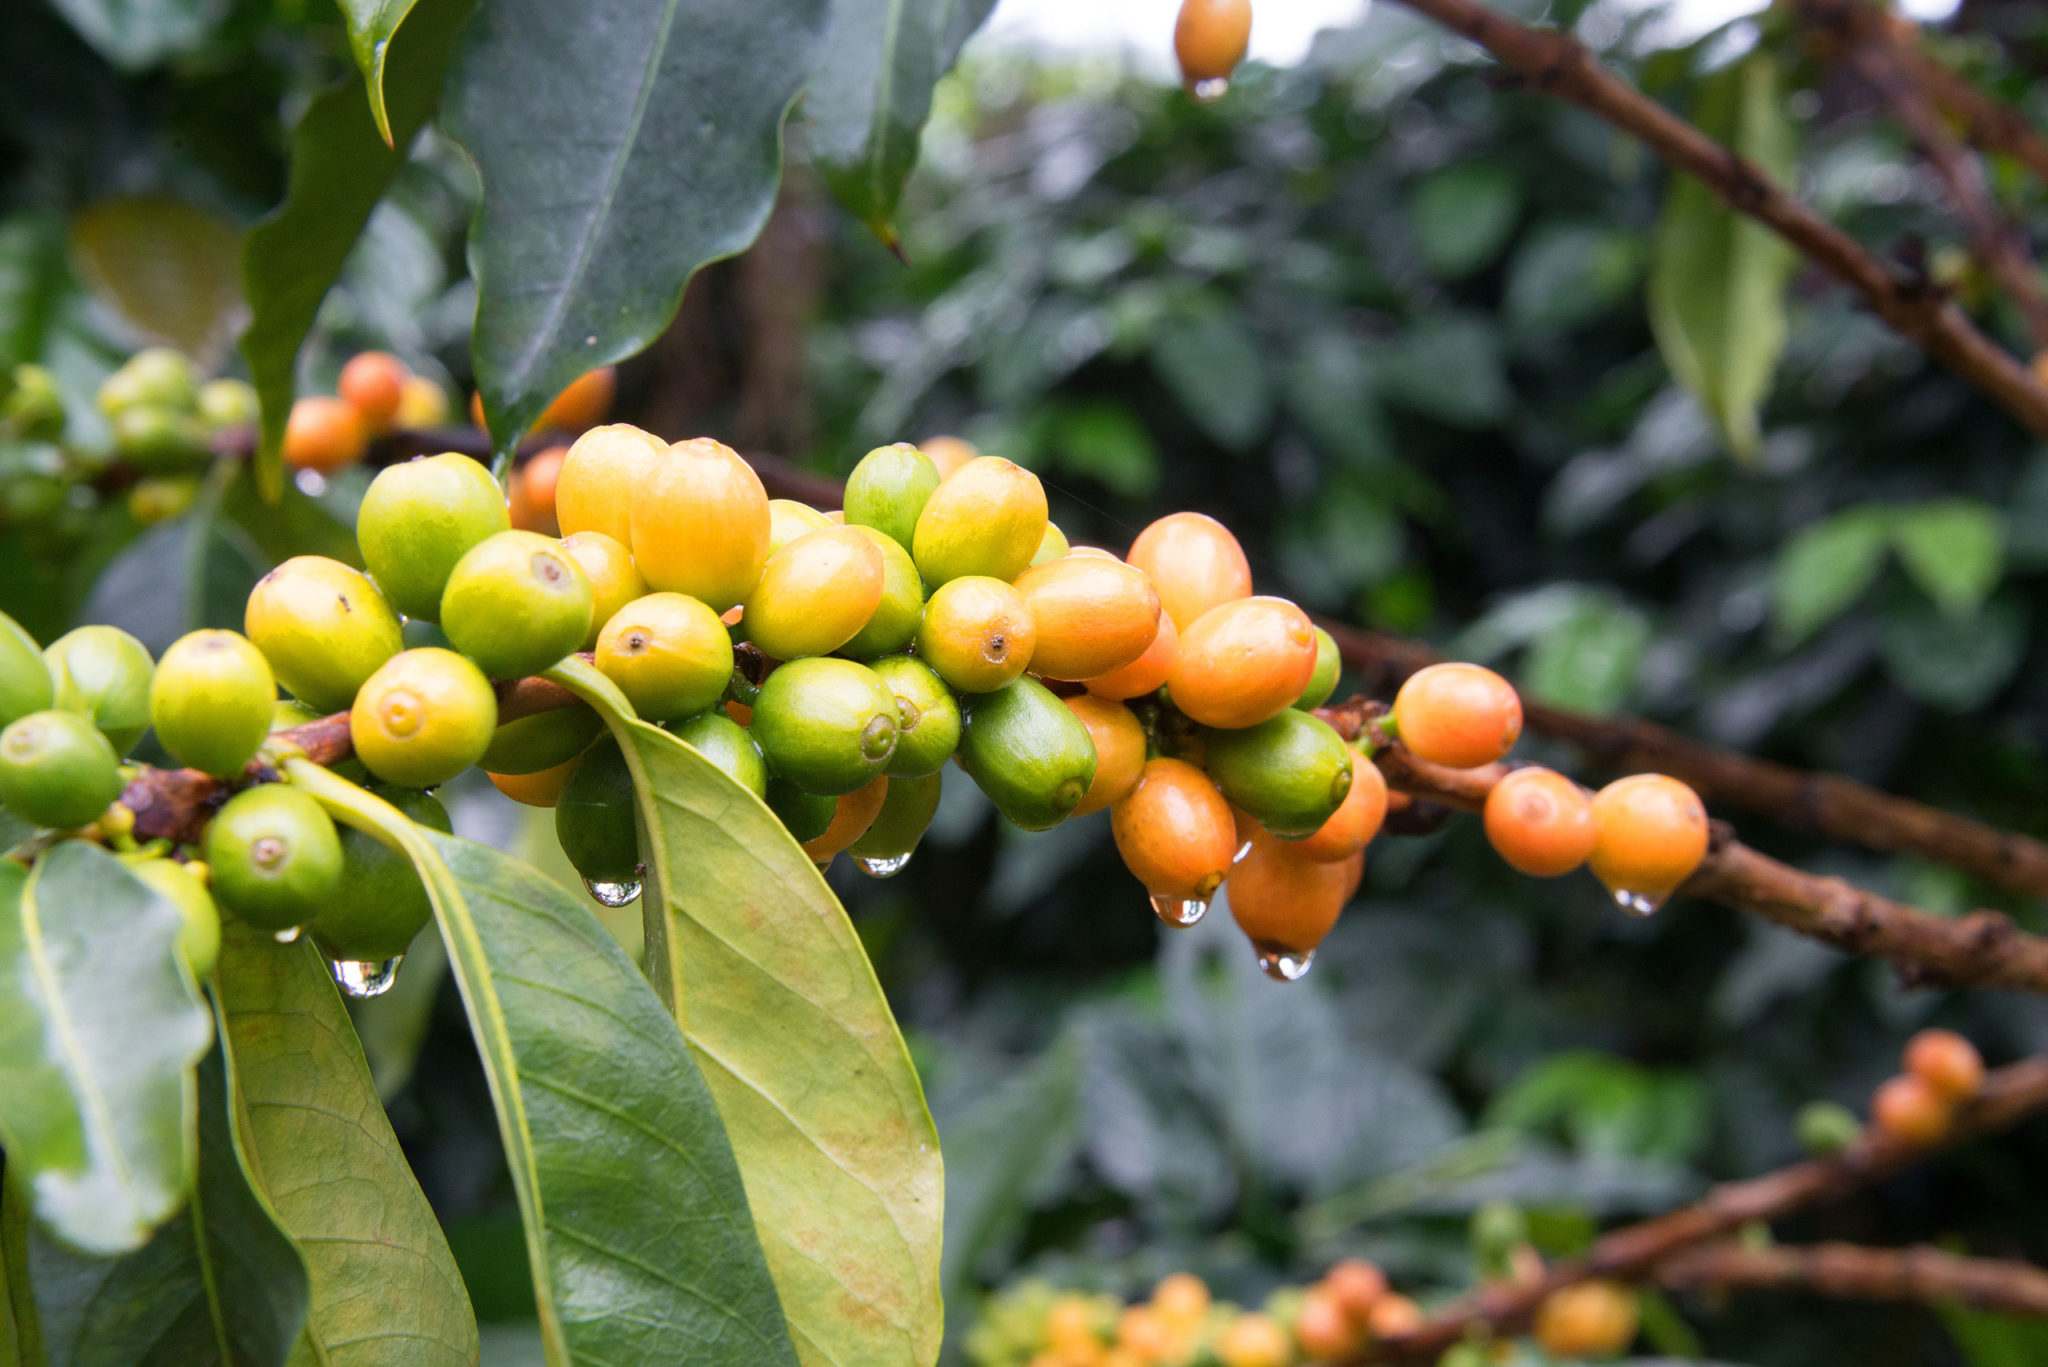 Coffee cherries of different color on coffee plant